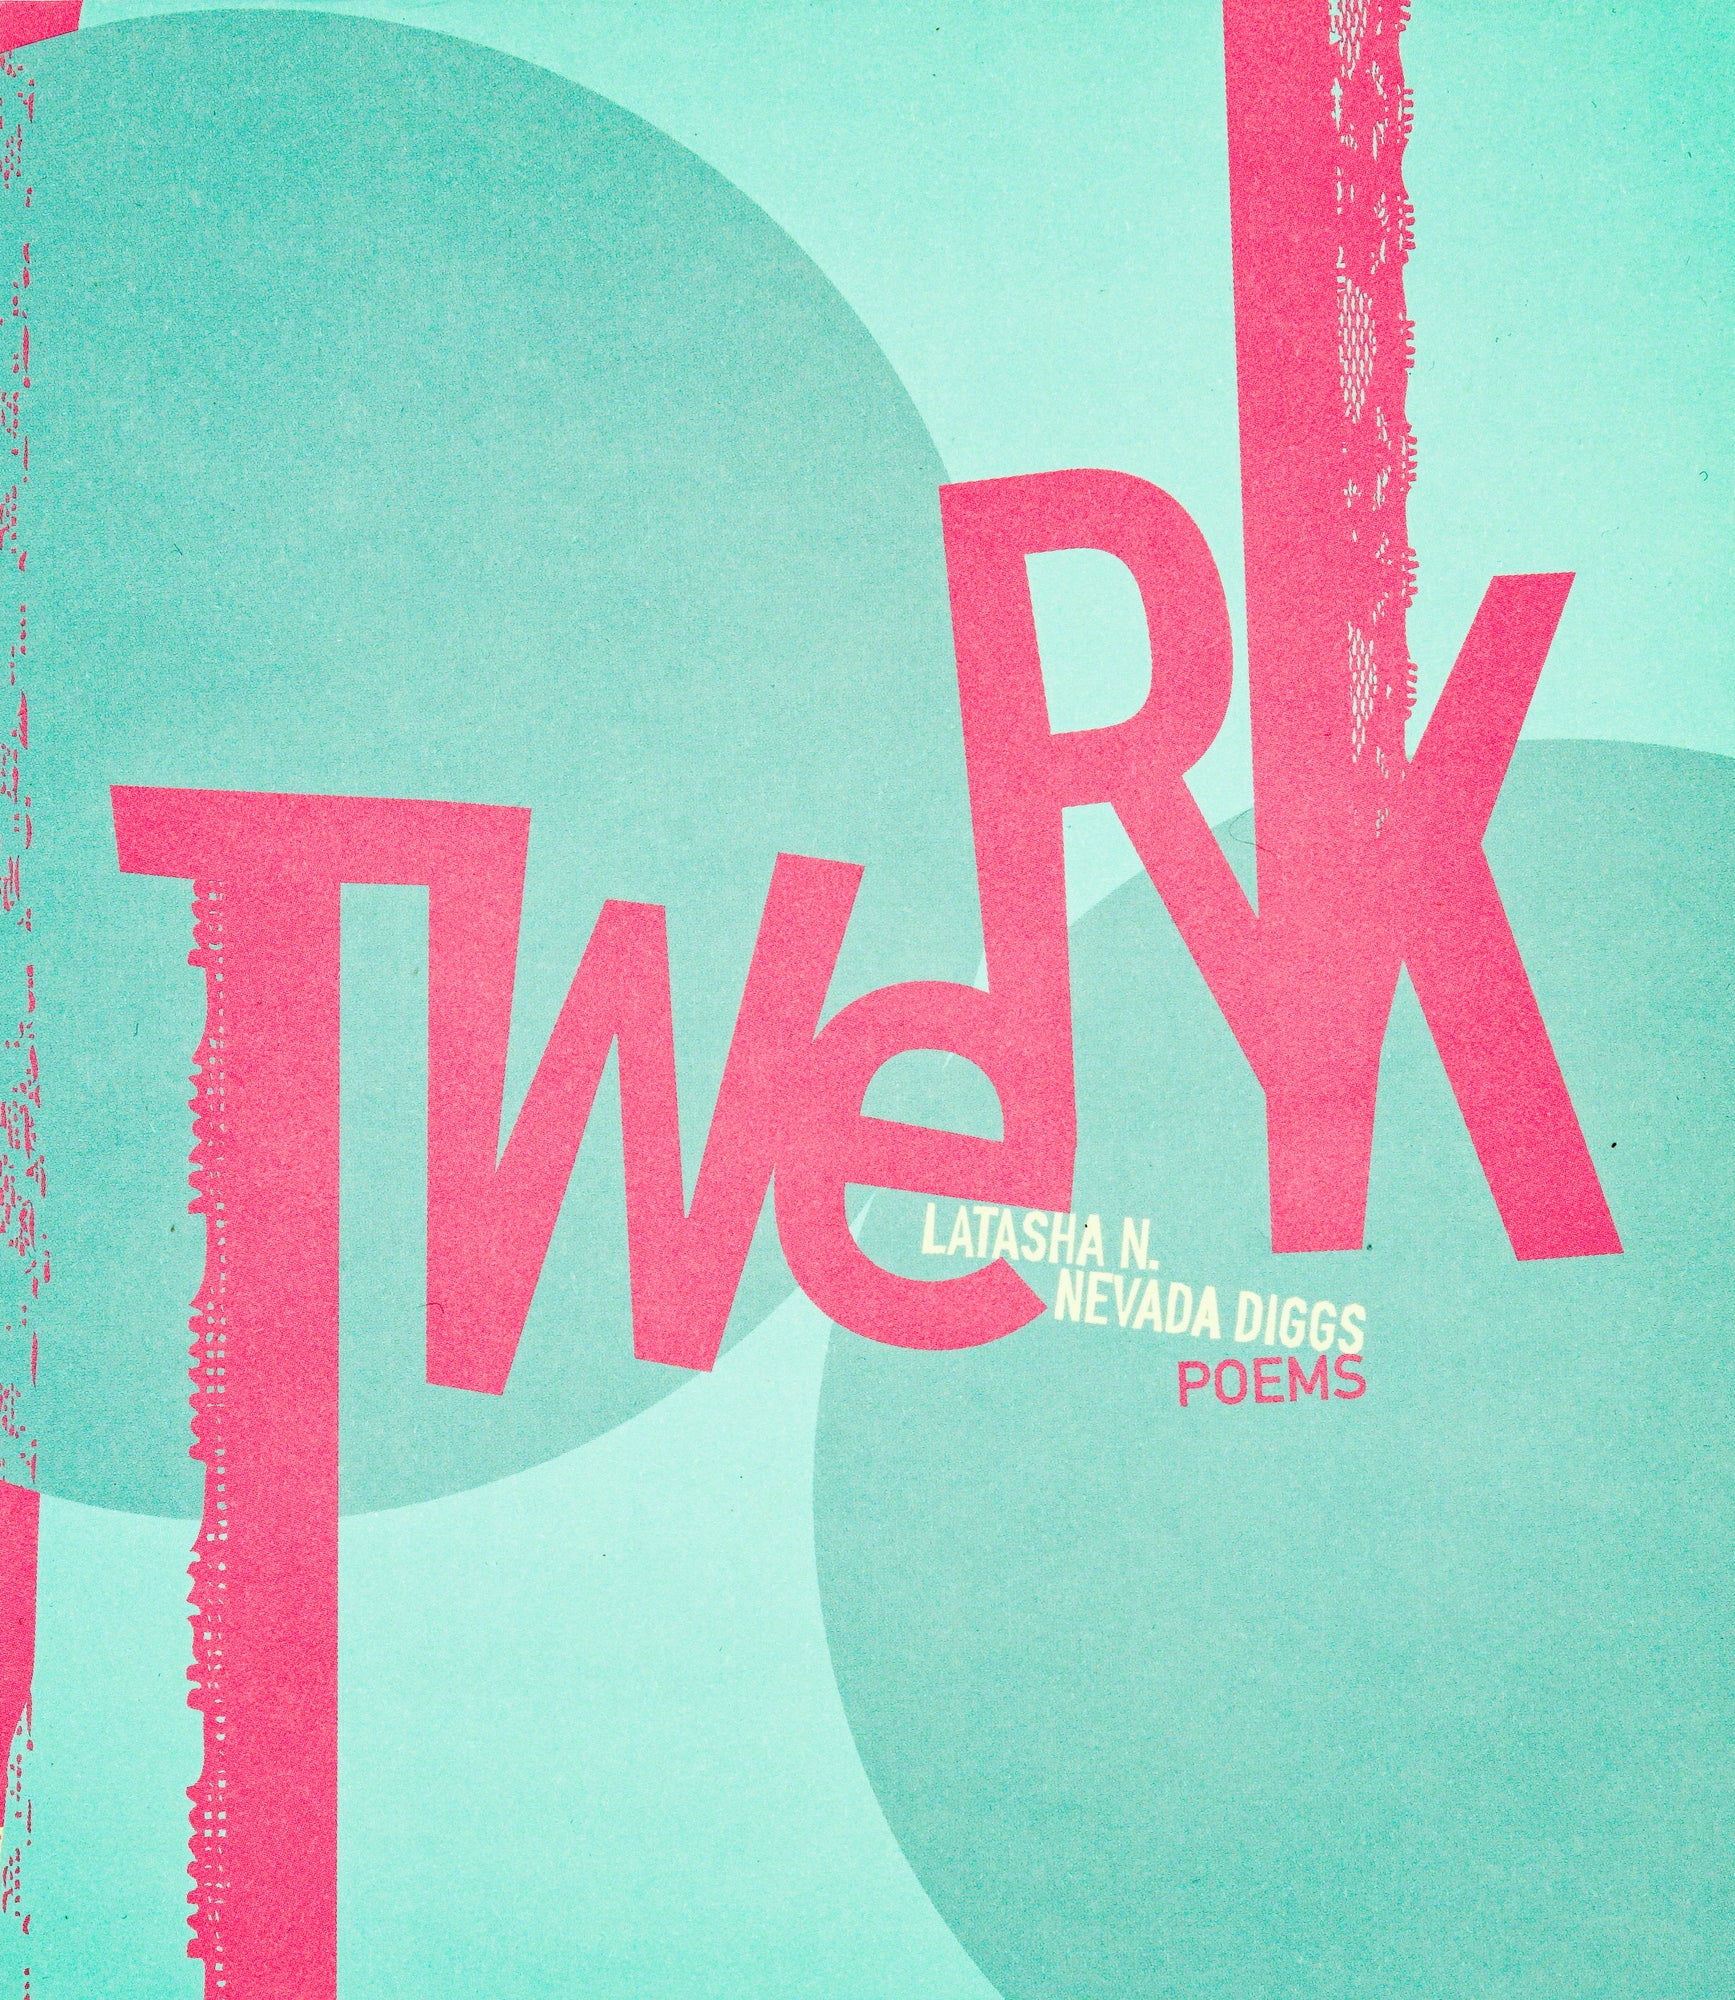 Book cover with monochrome mint background and two large circles in a slightly darker mint shade. The title Twerk is written in bright sans serif pink in asymmetrical large letters all over the page. The authors Latasha N. And Nevada Diggs are written in a small beige sans serif beige right below the title.